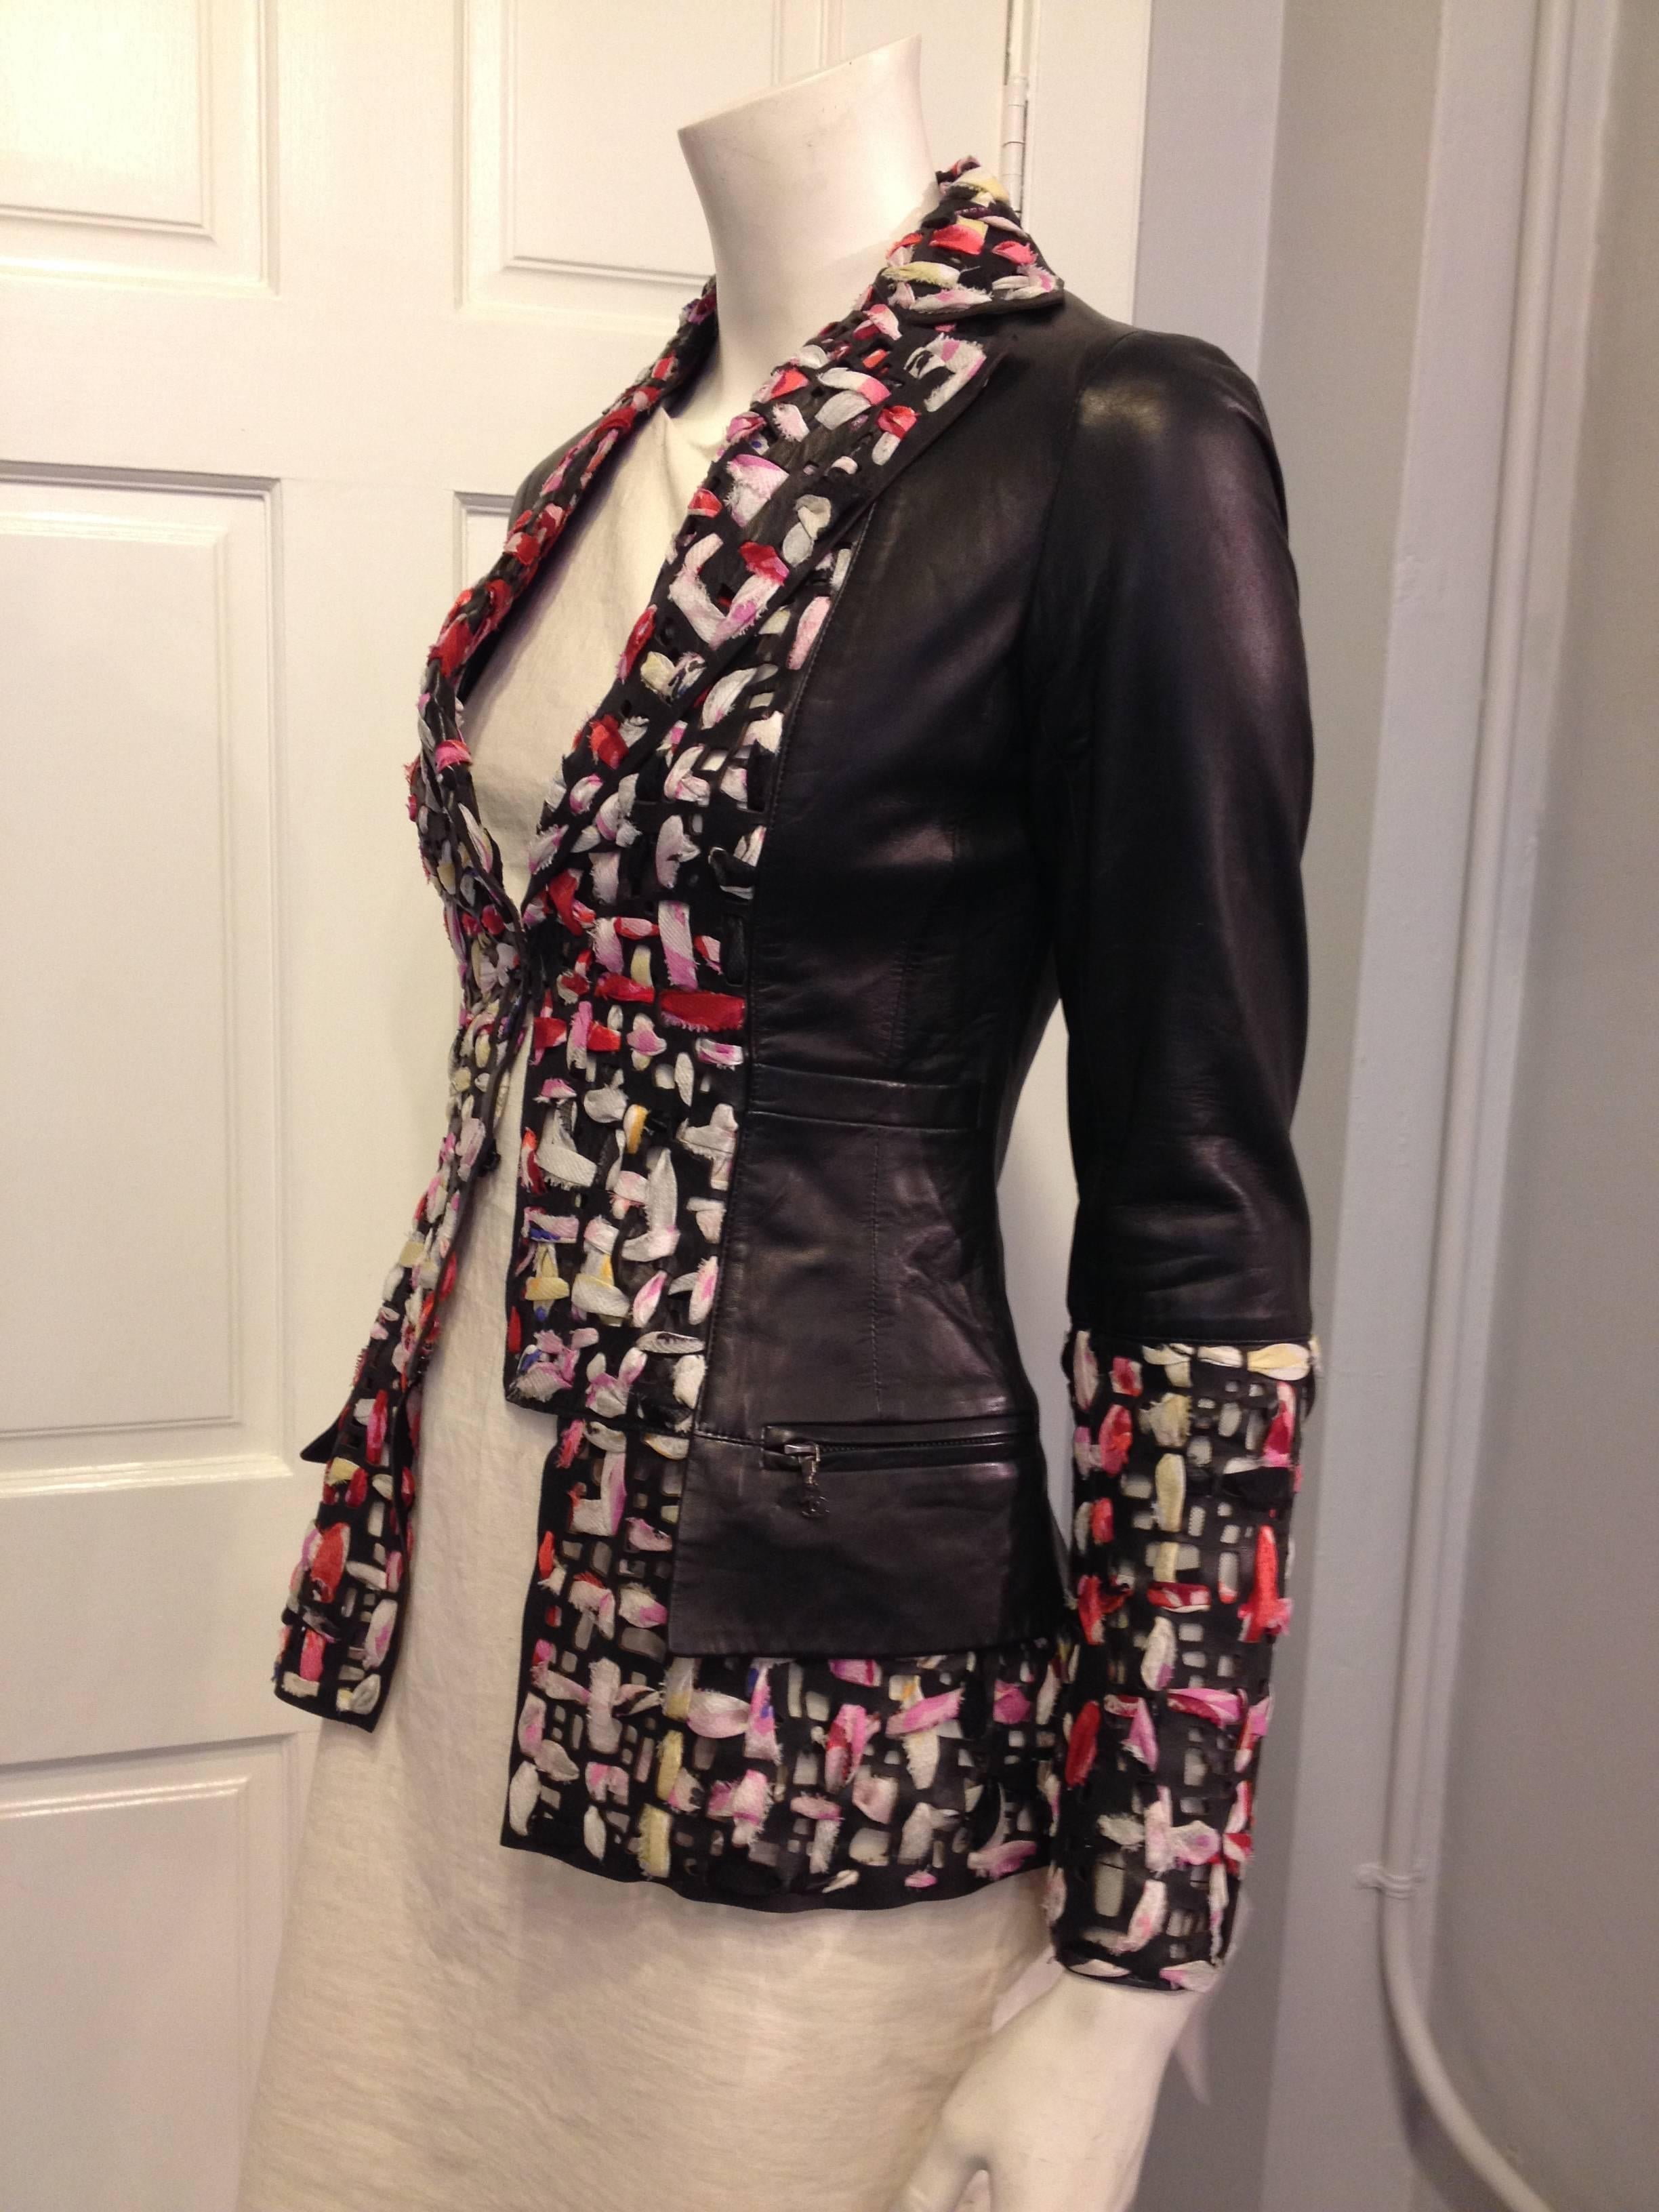 A mix of exuberant color and sharp black leather, this jacket is the perfect way to transition from one season into the next. Intricate cutouts perforating the collar, sleeve, and hem are woven with strips of lush colored silk fabric, creating a